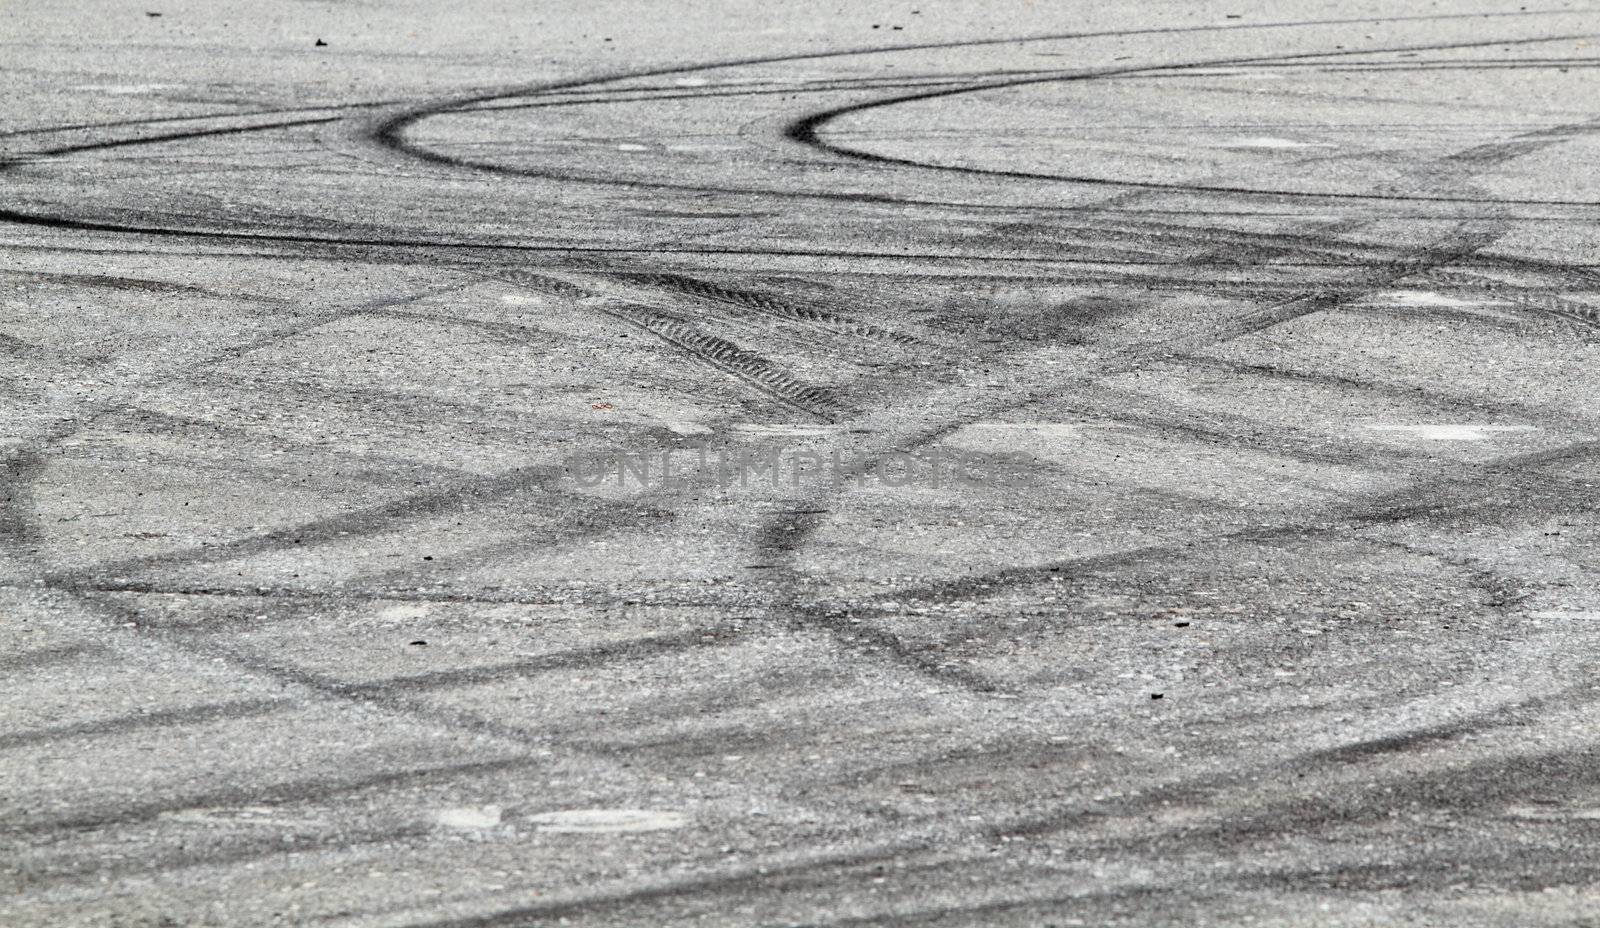 Tire marks on road track